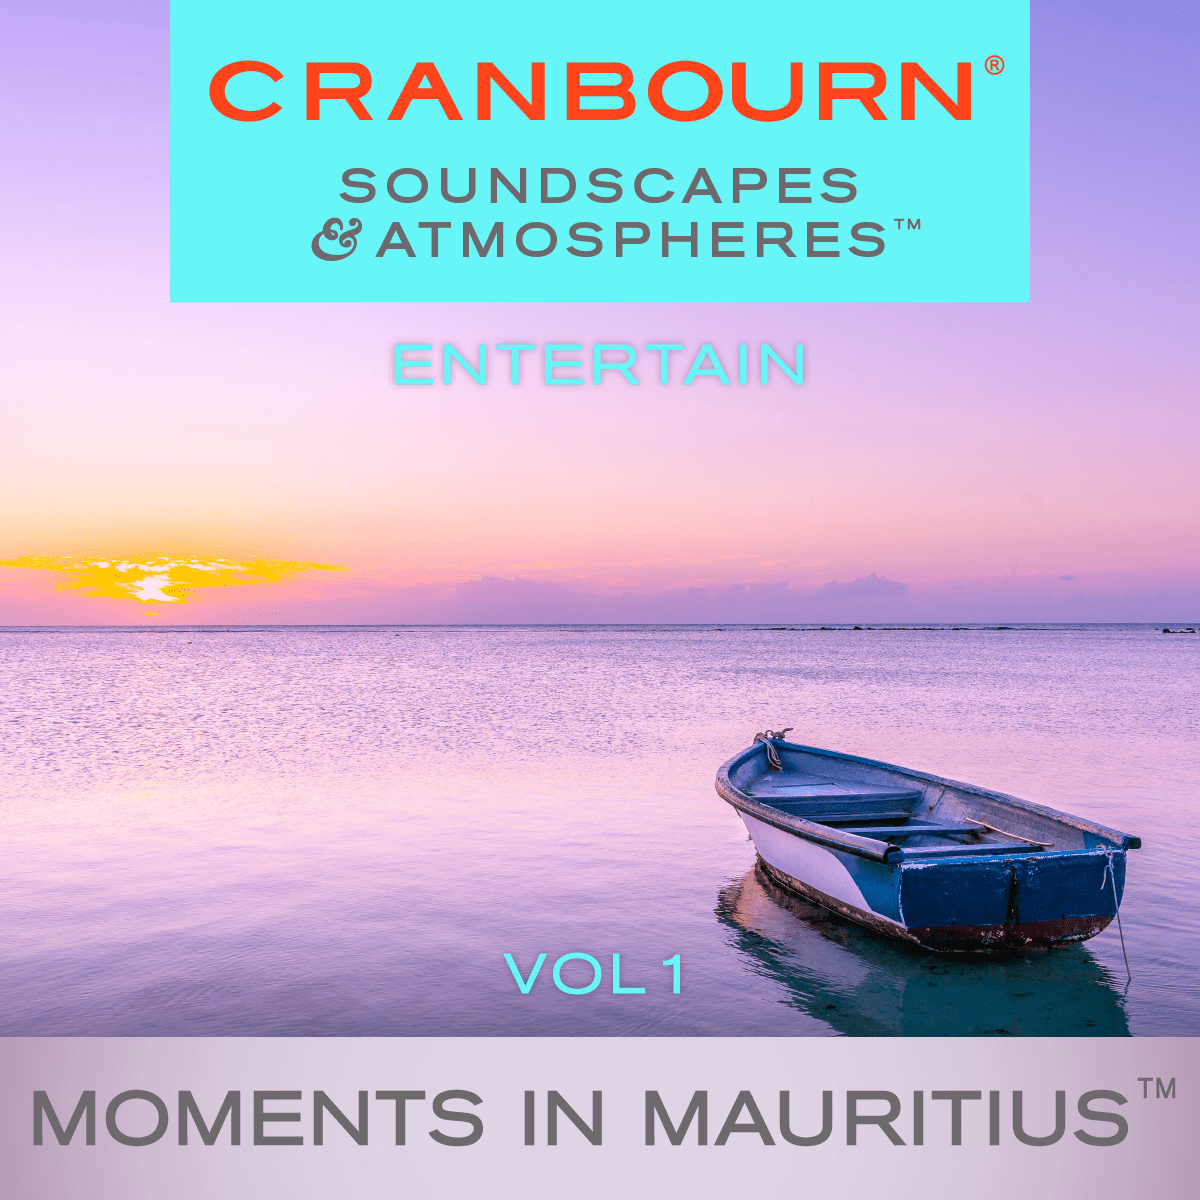 Moments in Mauritius™